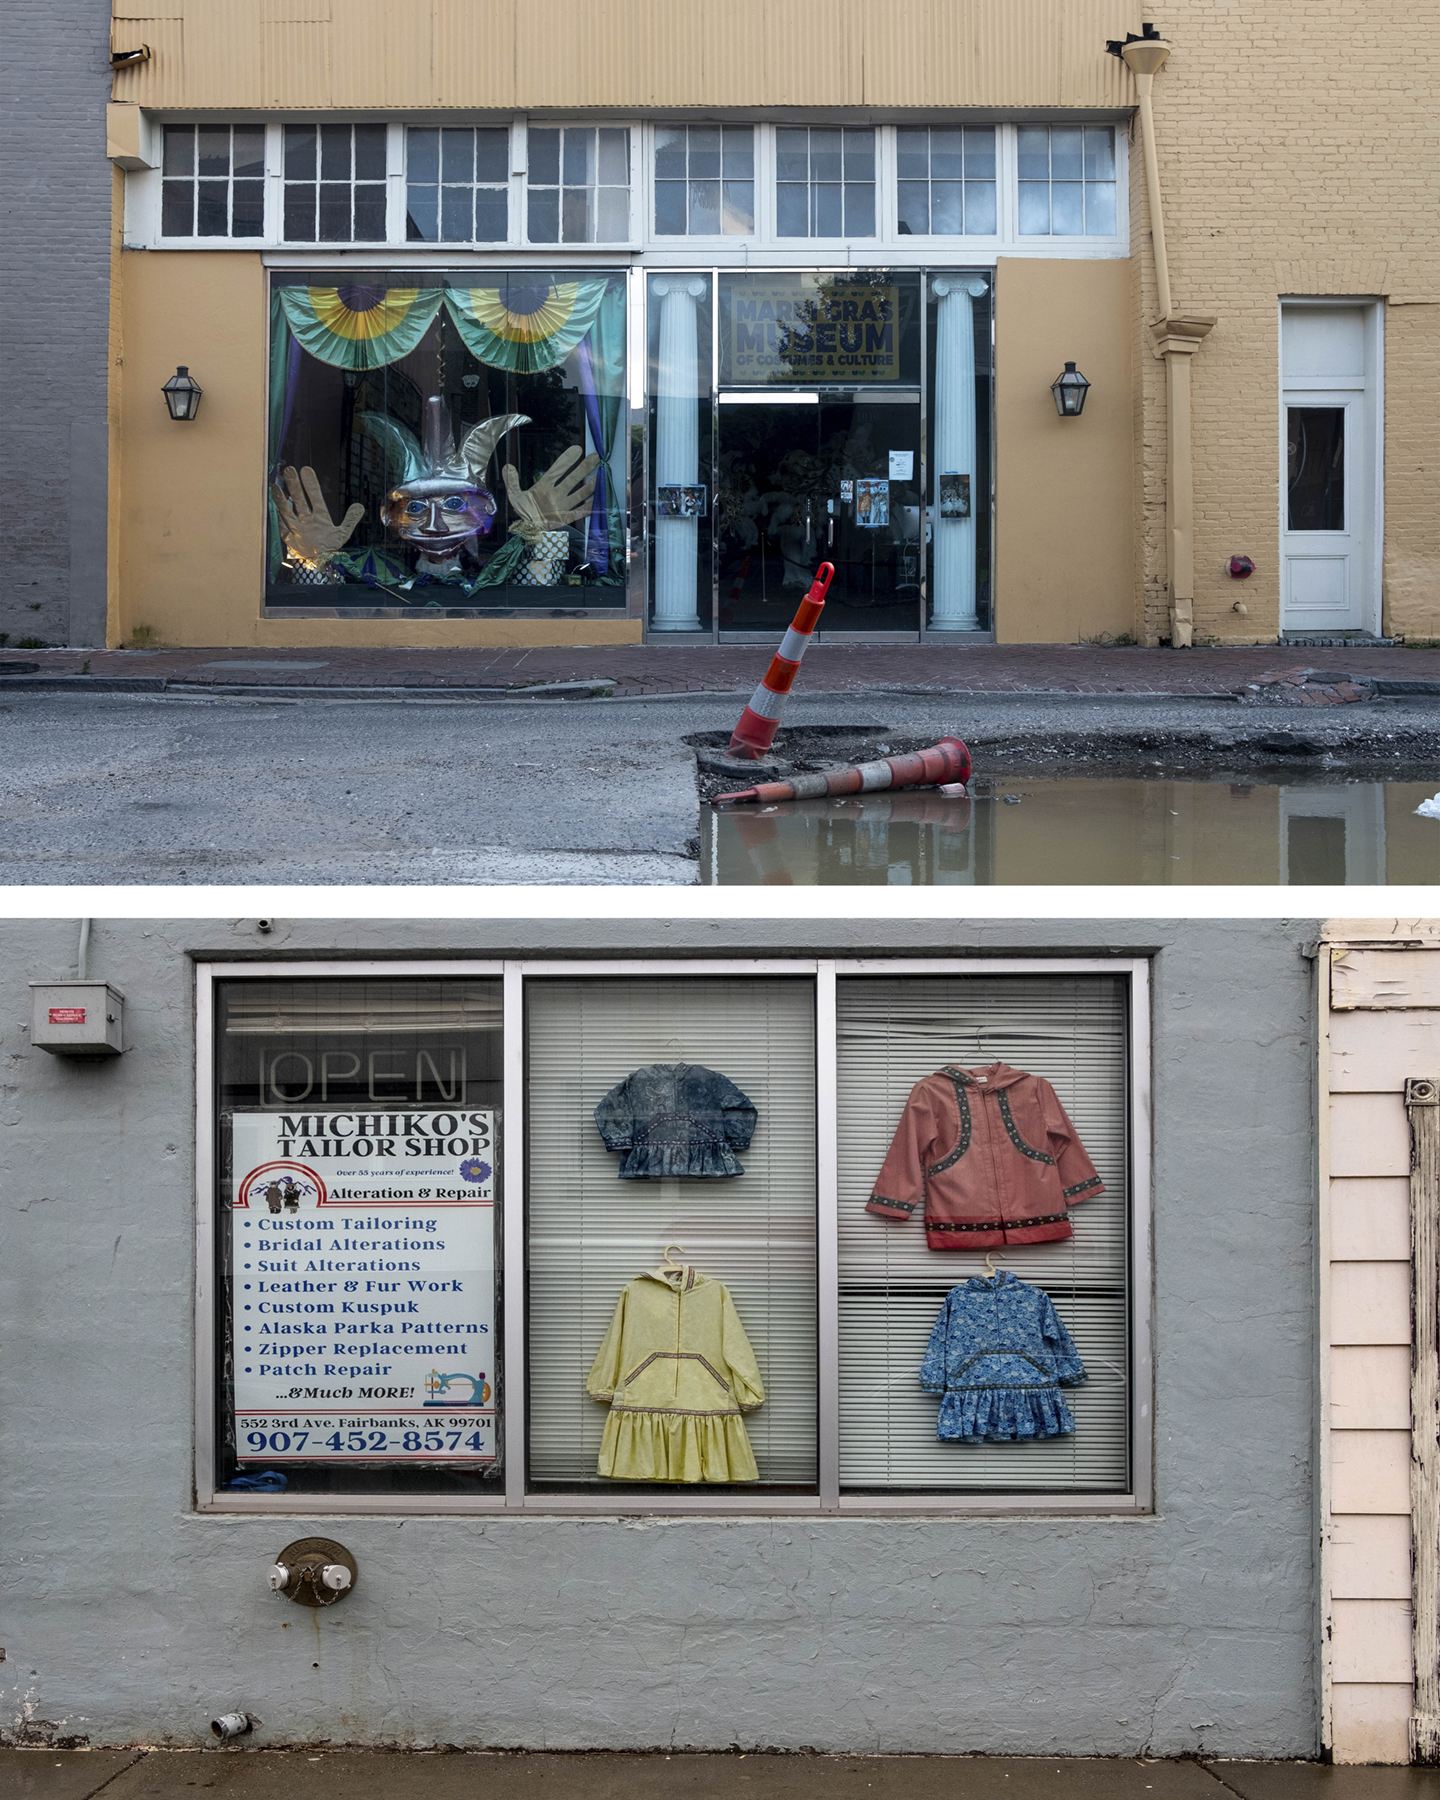 Storefronts in Louisiana and Alaska, courtesy of the artist